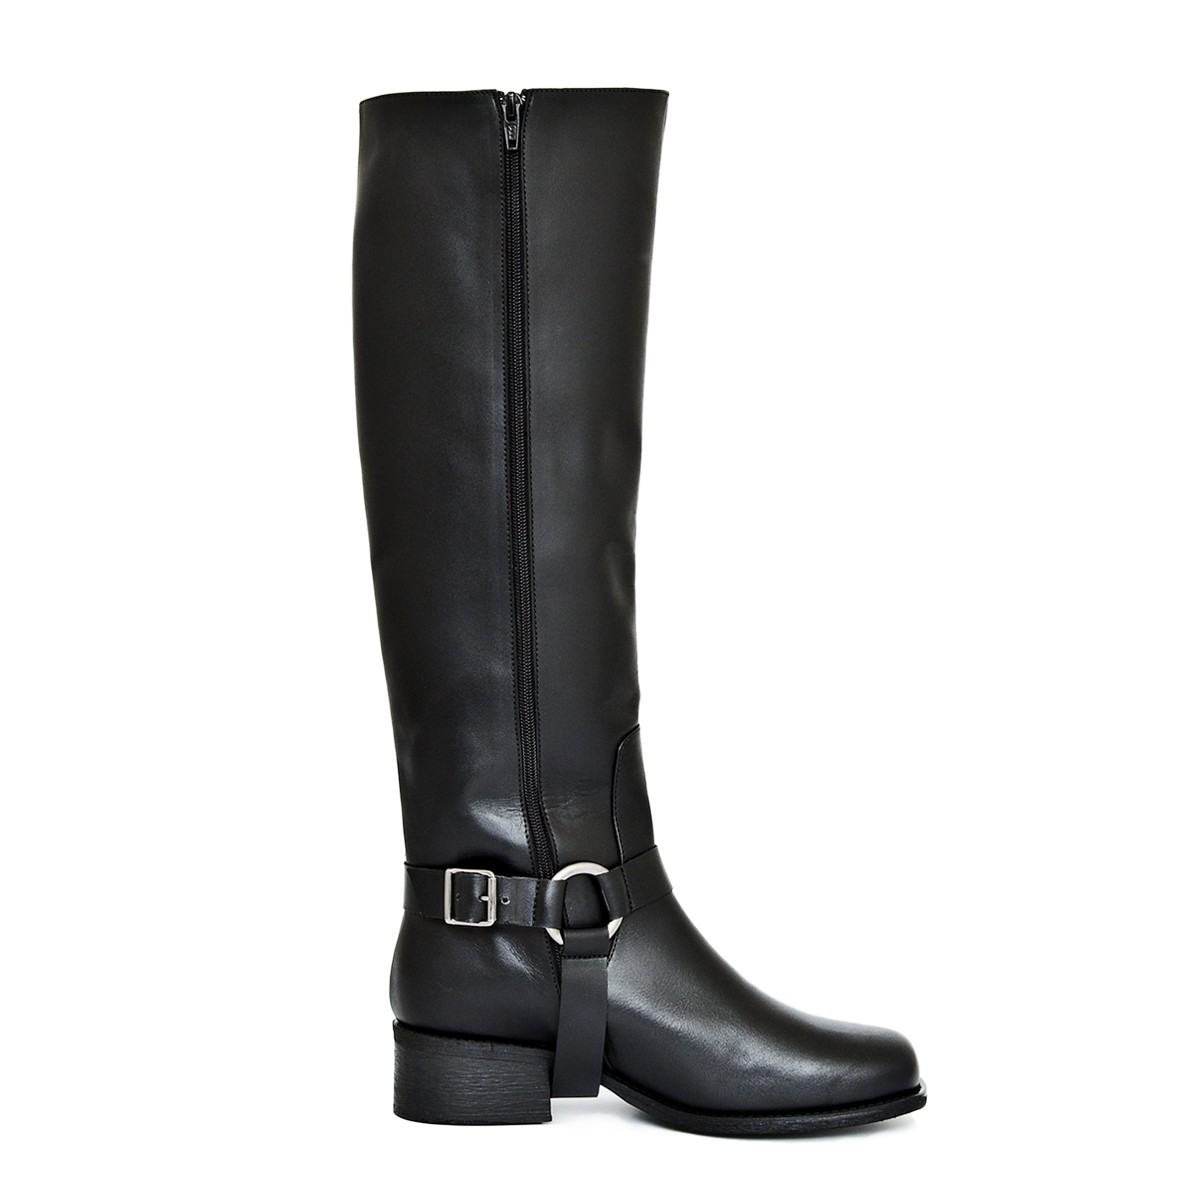 Biker boots knee high made-to-measure